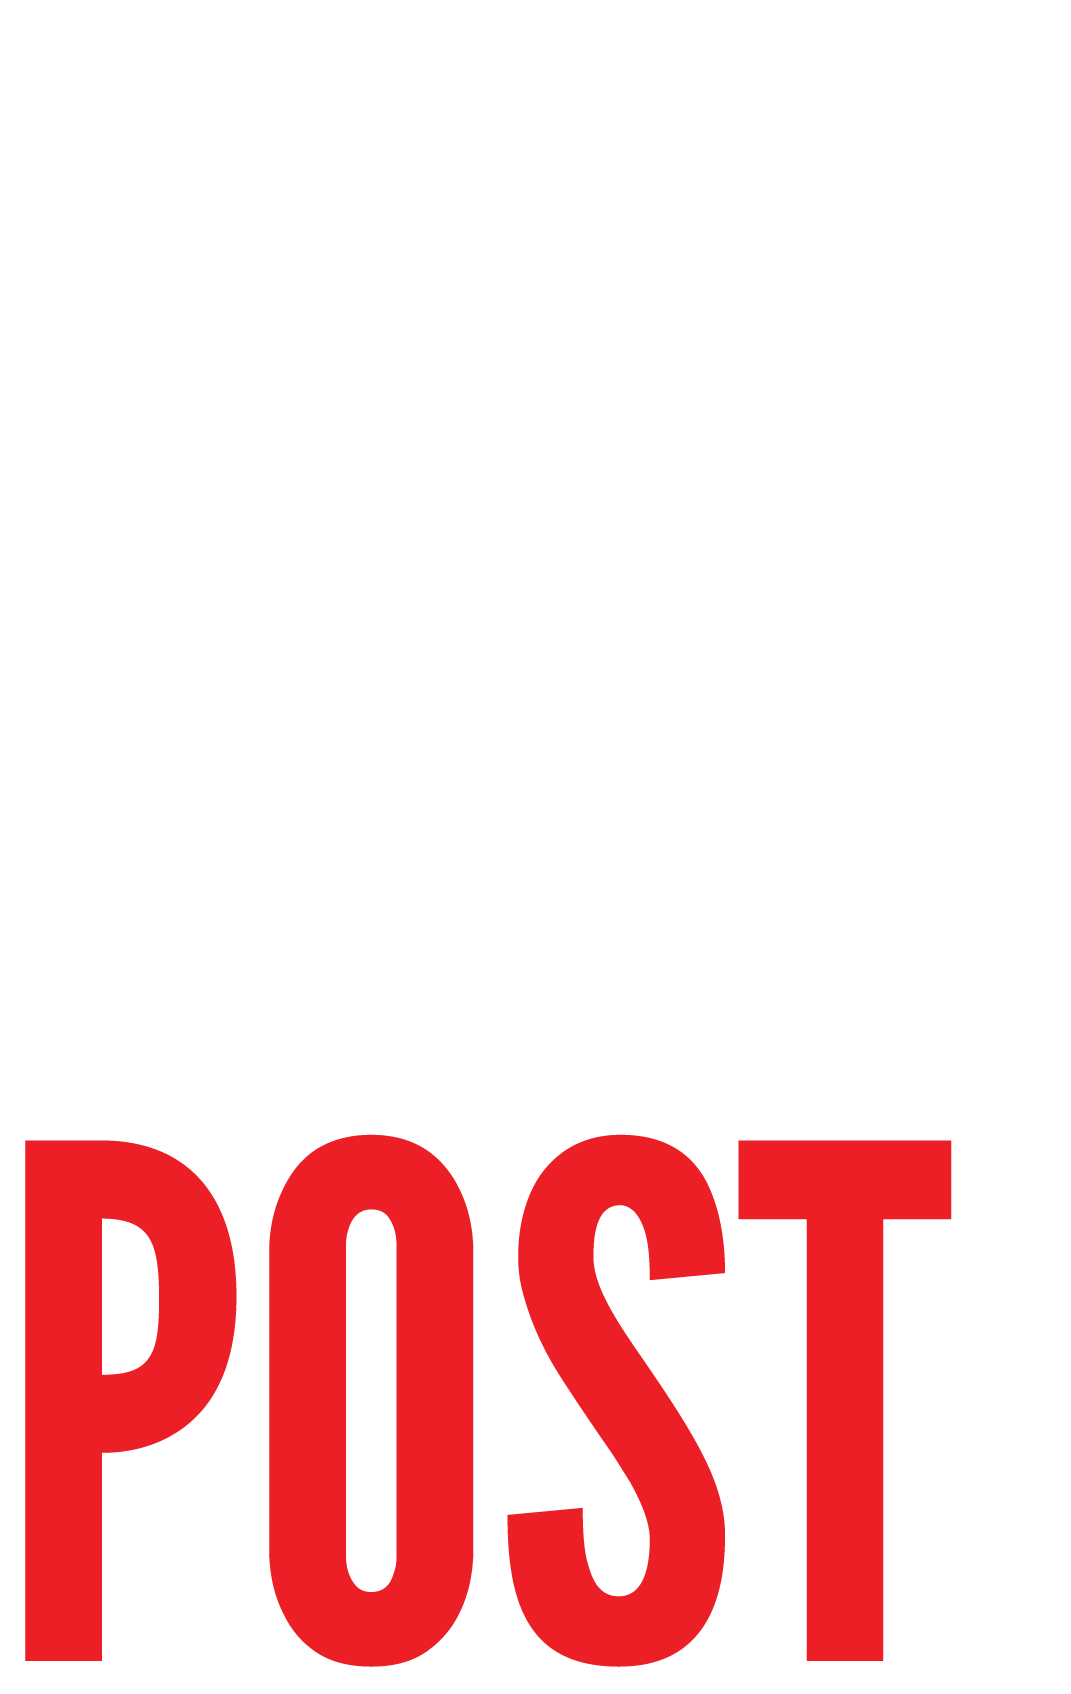 Red Hook Post